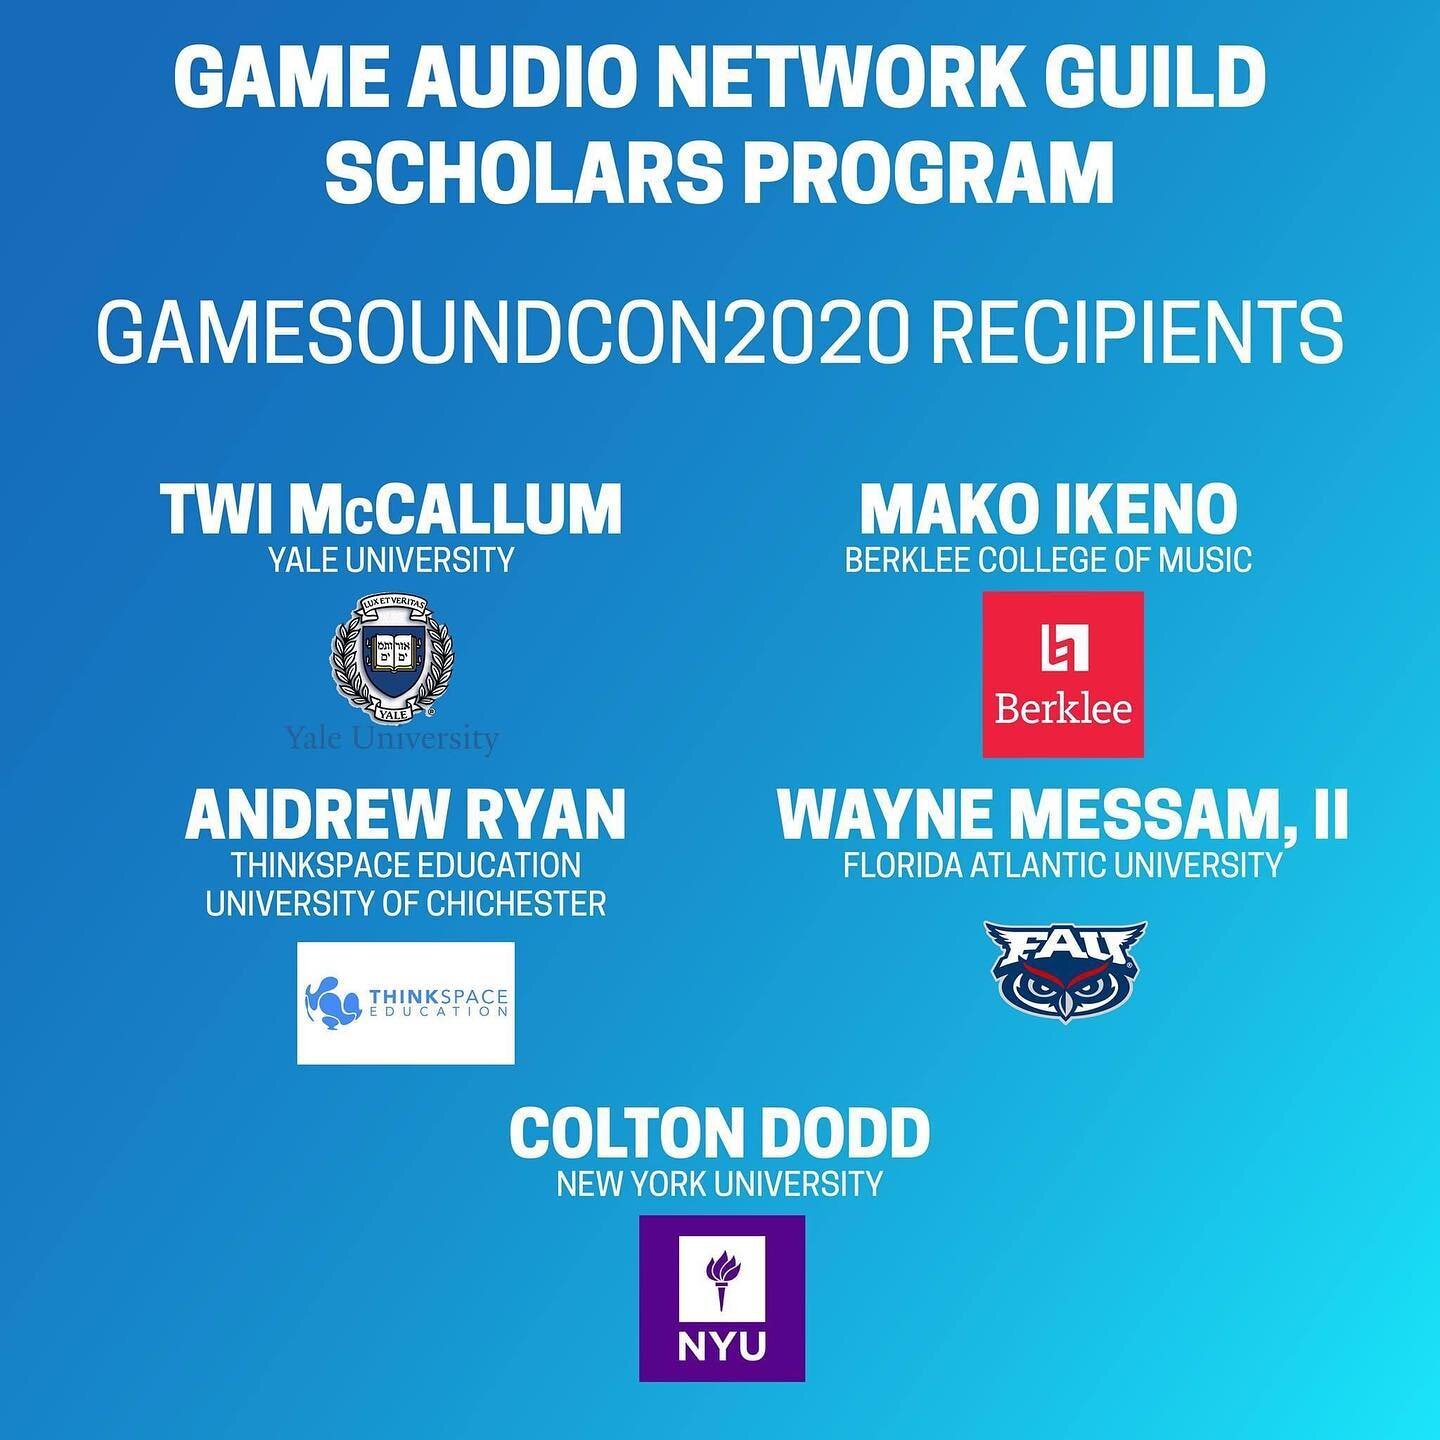 Wow! Look at this thing! Excited to meet the other recipients and learn a bunch of stuff! Can&rsquo;t wait for GameSoundCon!
Thanks @gameaudionetworkguild 🙌🏼